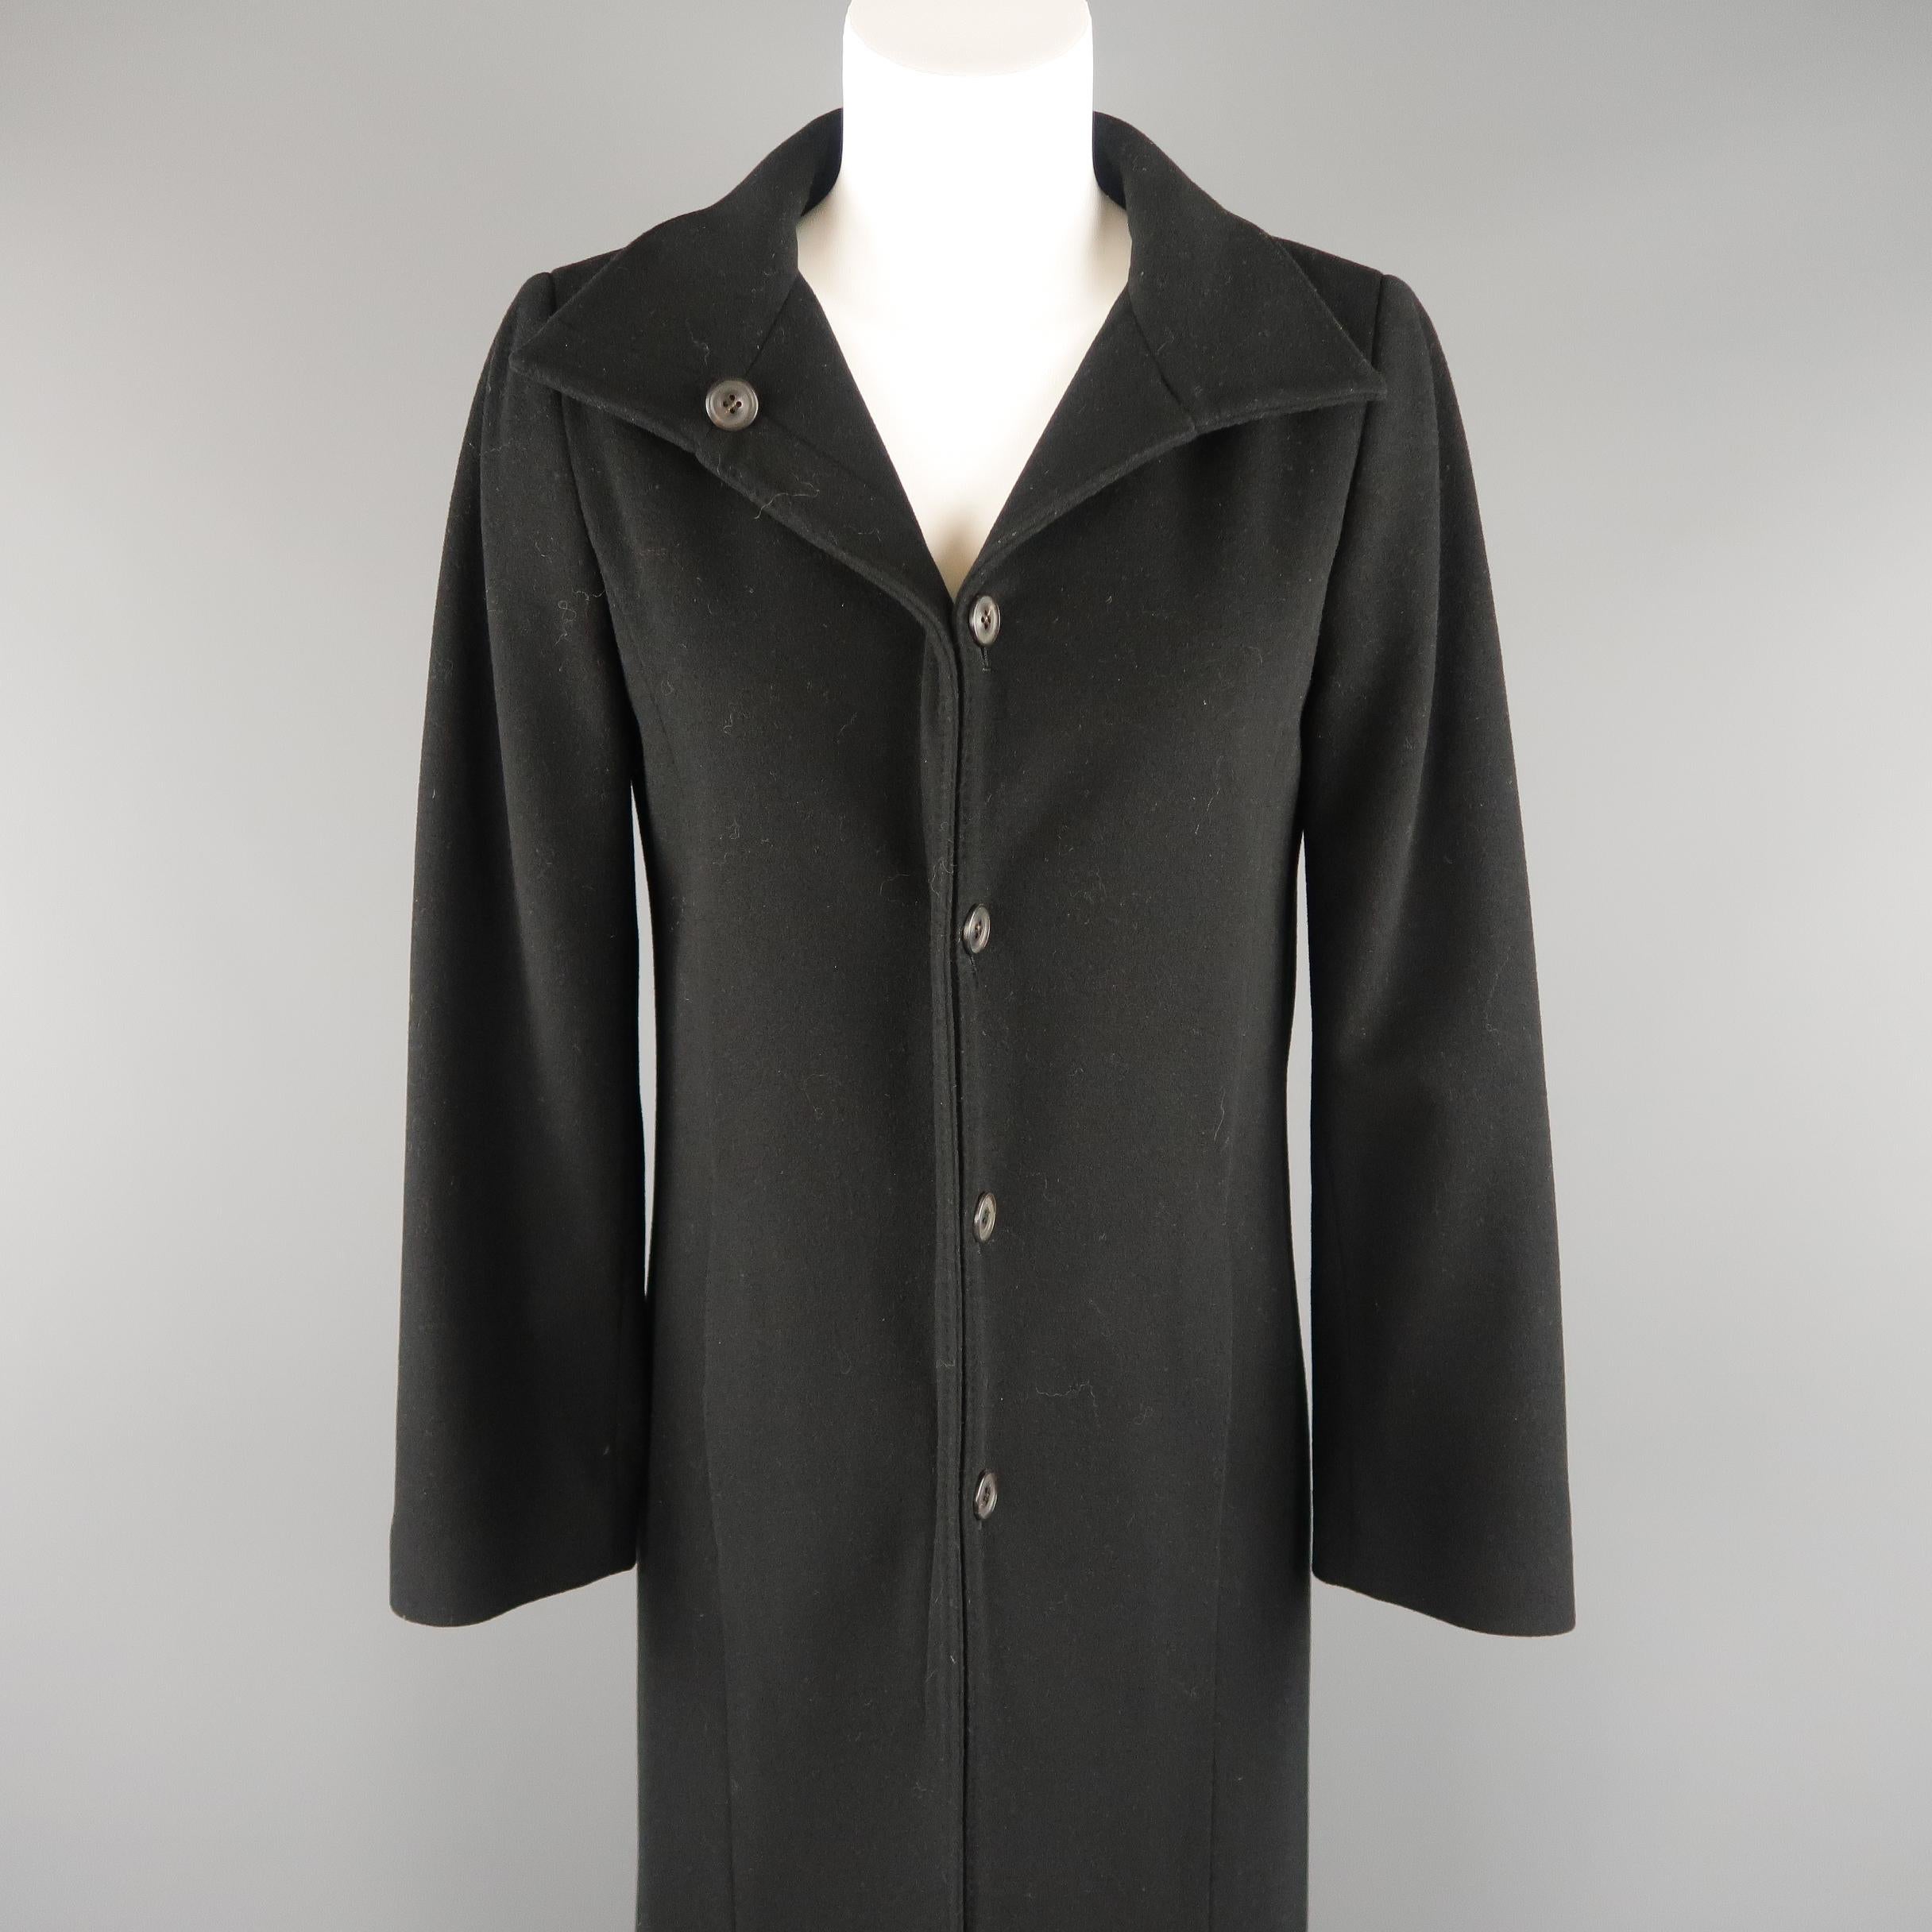 BARNEY'S NEW YORK coat comes in wool cashmere blend fabric with button in closure, slit pockets, and high back slit. Made in Italy.
 
Excellent Pre-Owned Condition.
Marked: 40 / 6
 
Measurements:
 
Shoulder: 15 in.
Bust: 38 in.
Waist: 36 in.
Hip: 40